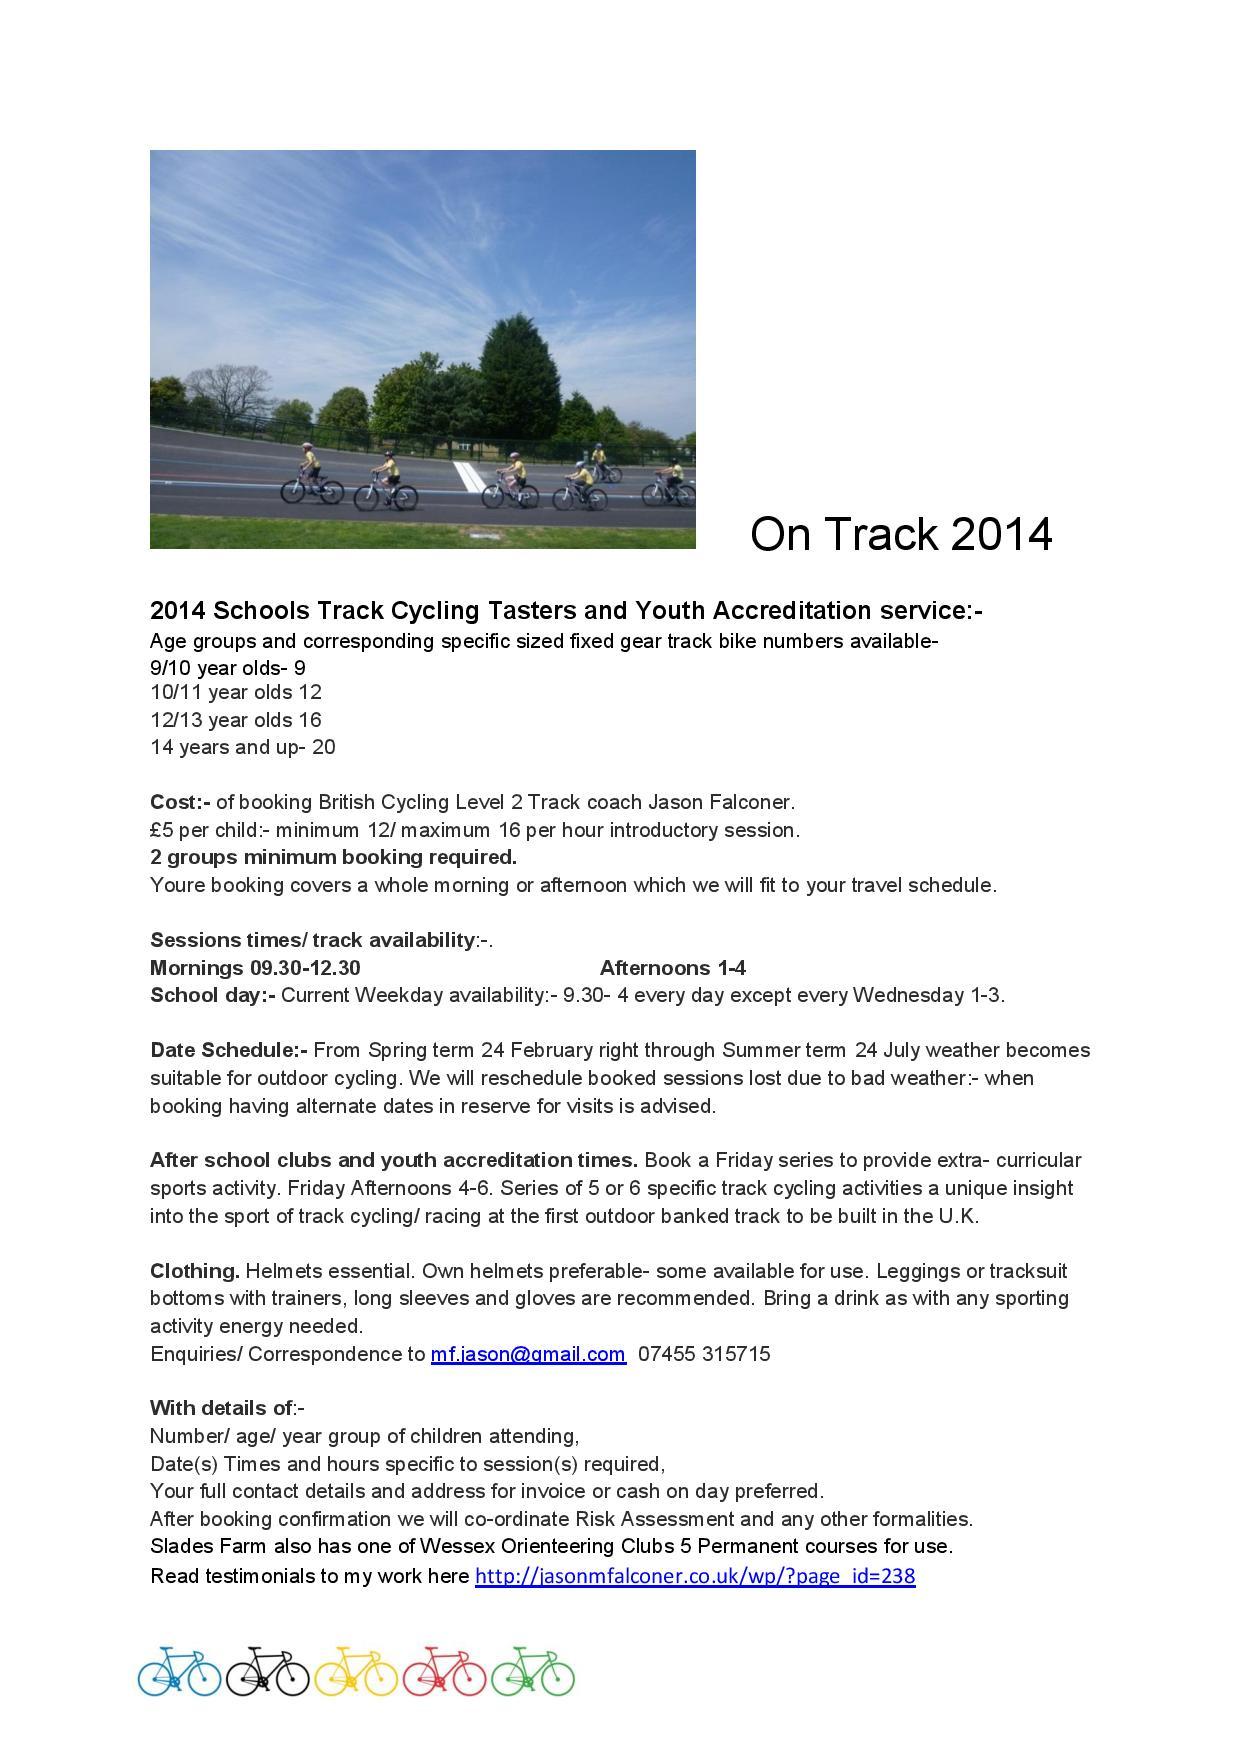 schools-on-track-2014-page-001